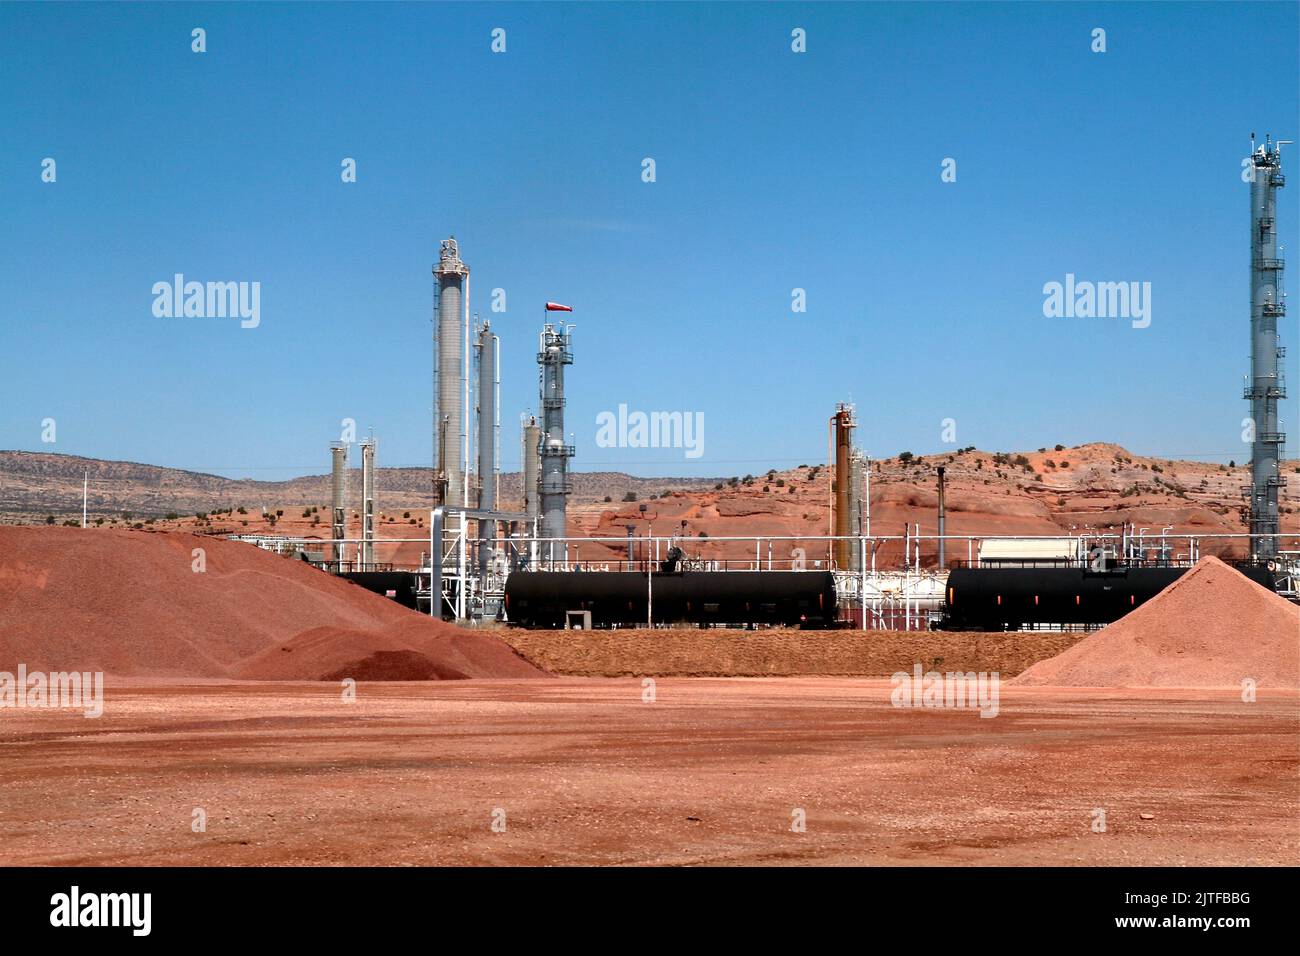 United States, New Mexico, Gallup, Oil and gas plant Stock Photo